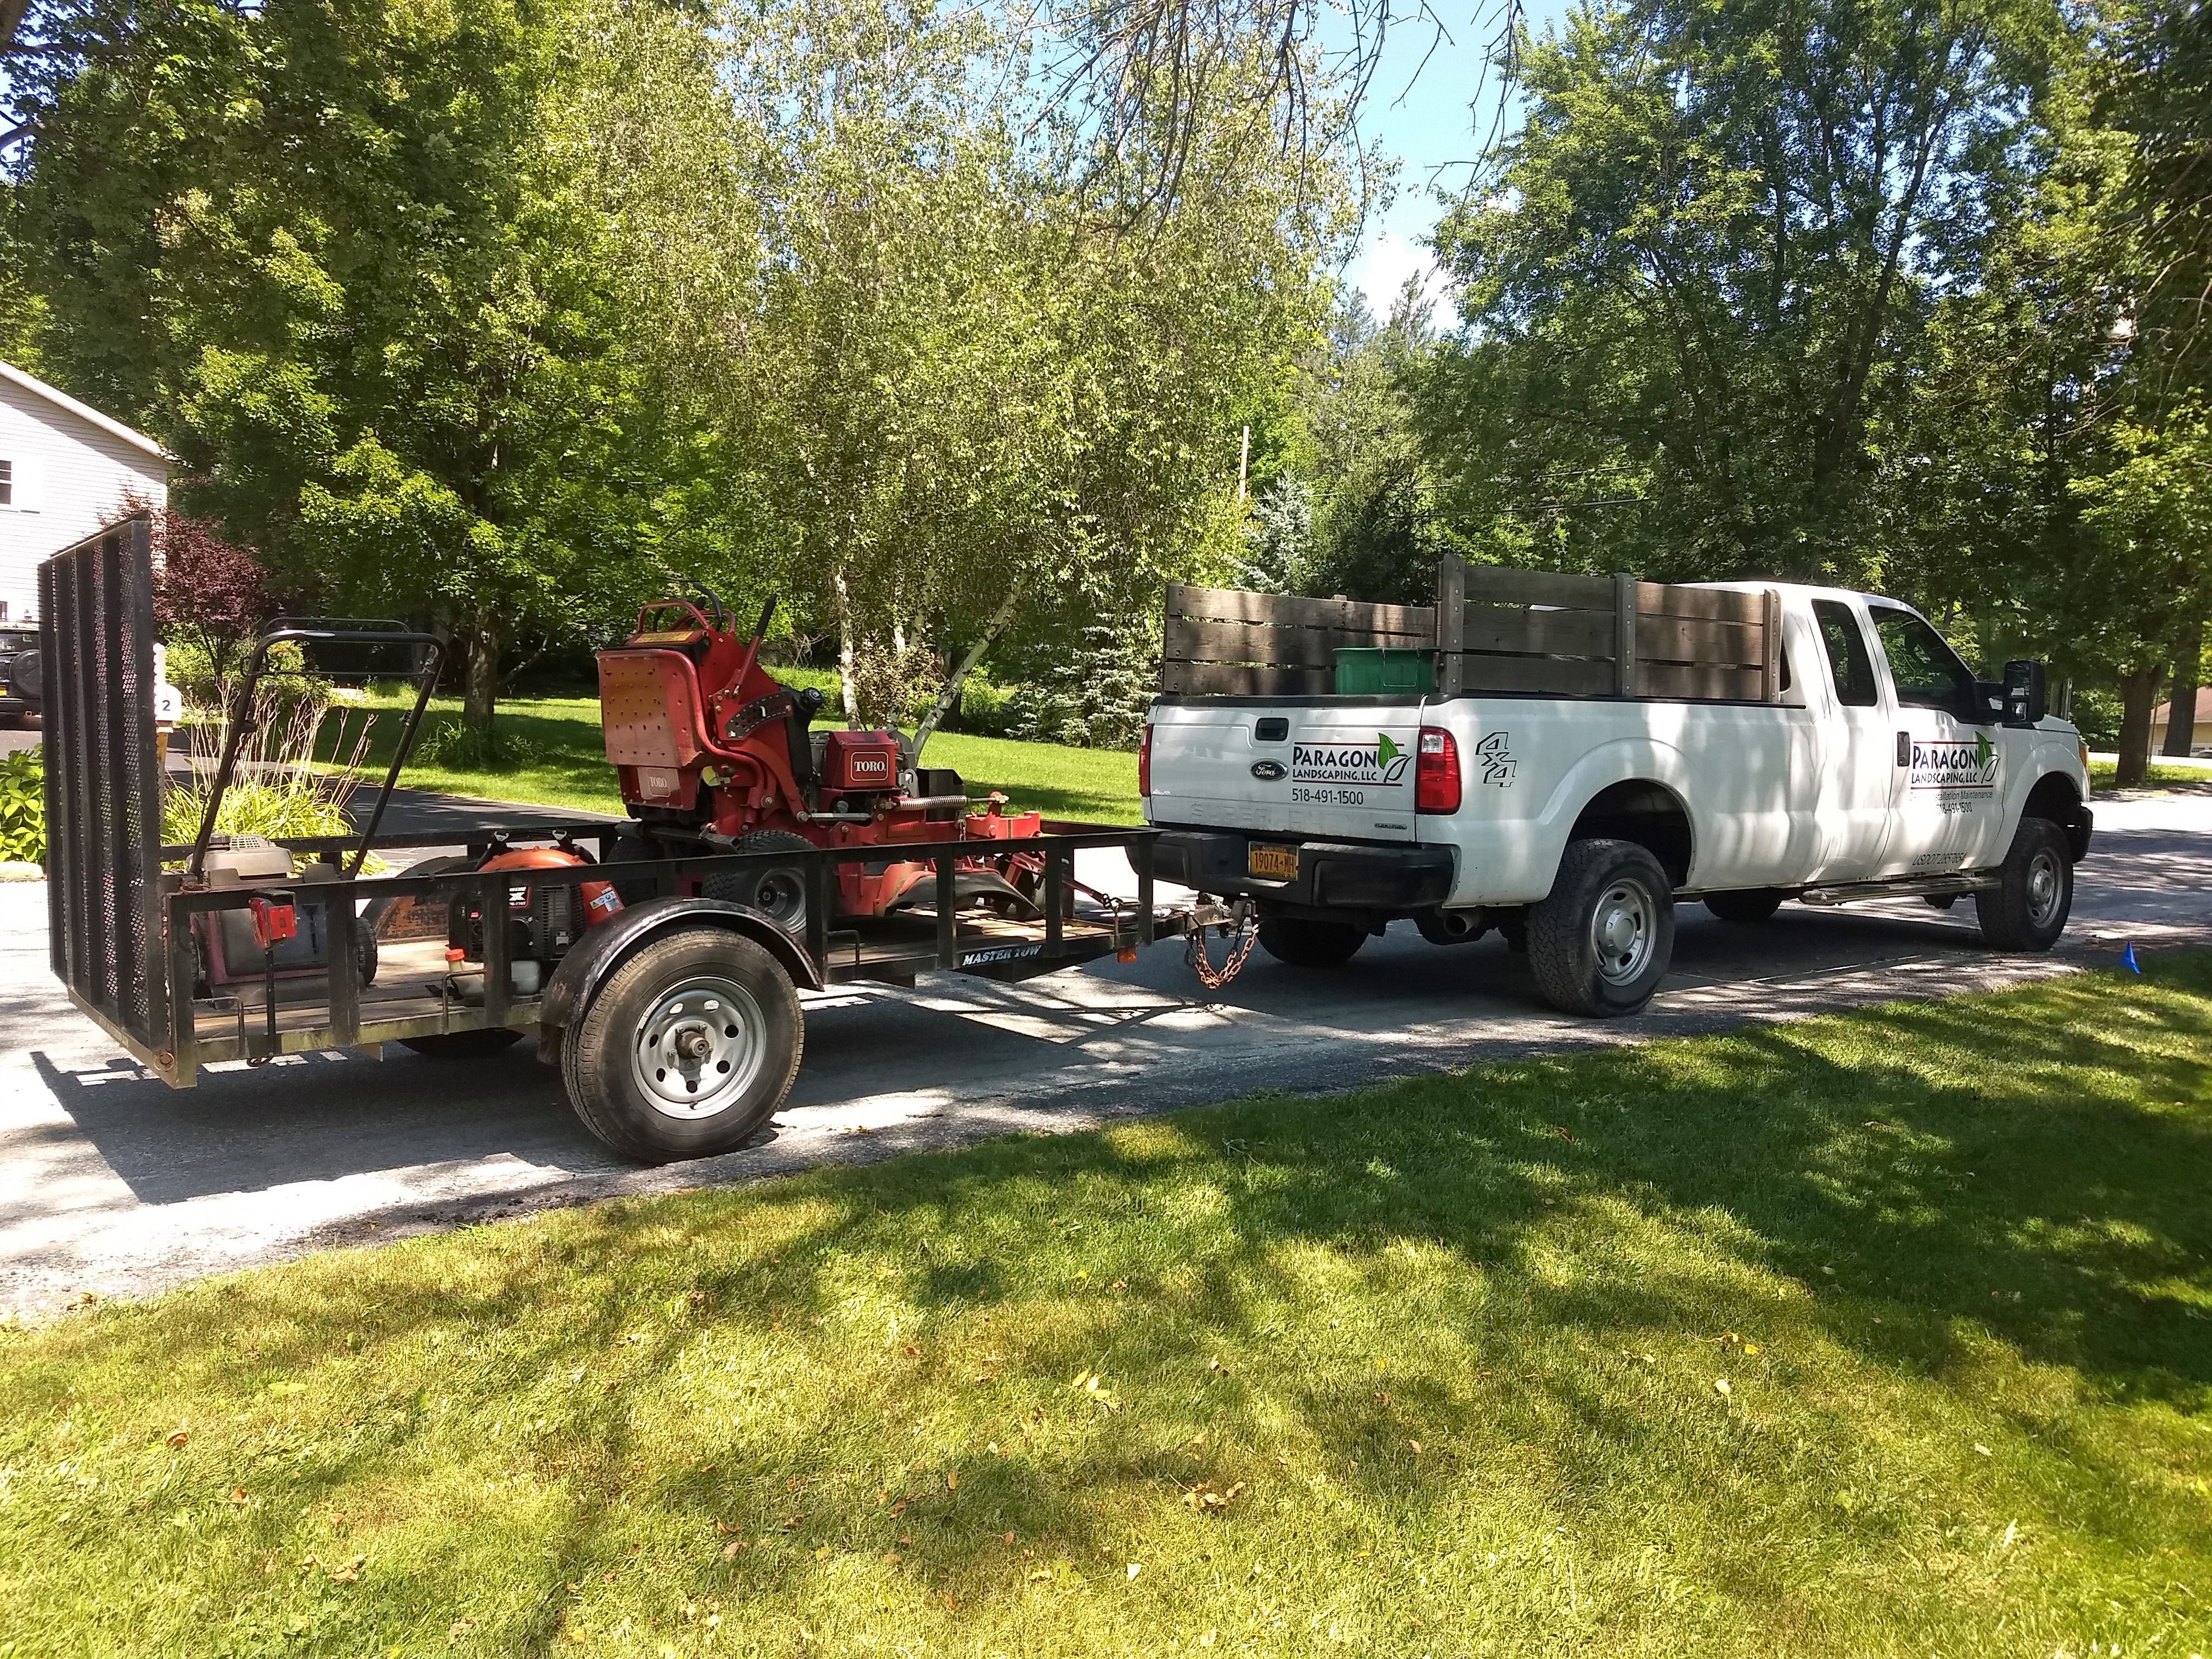 Thumbmnail image of the Paragon Landscaping work truck with a mower on a trailer attached to the hitch